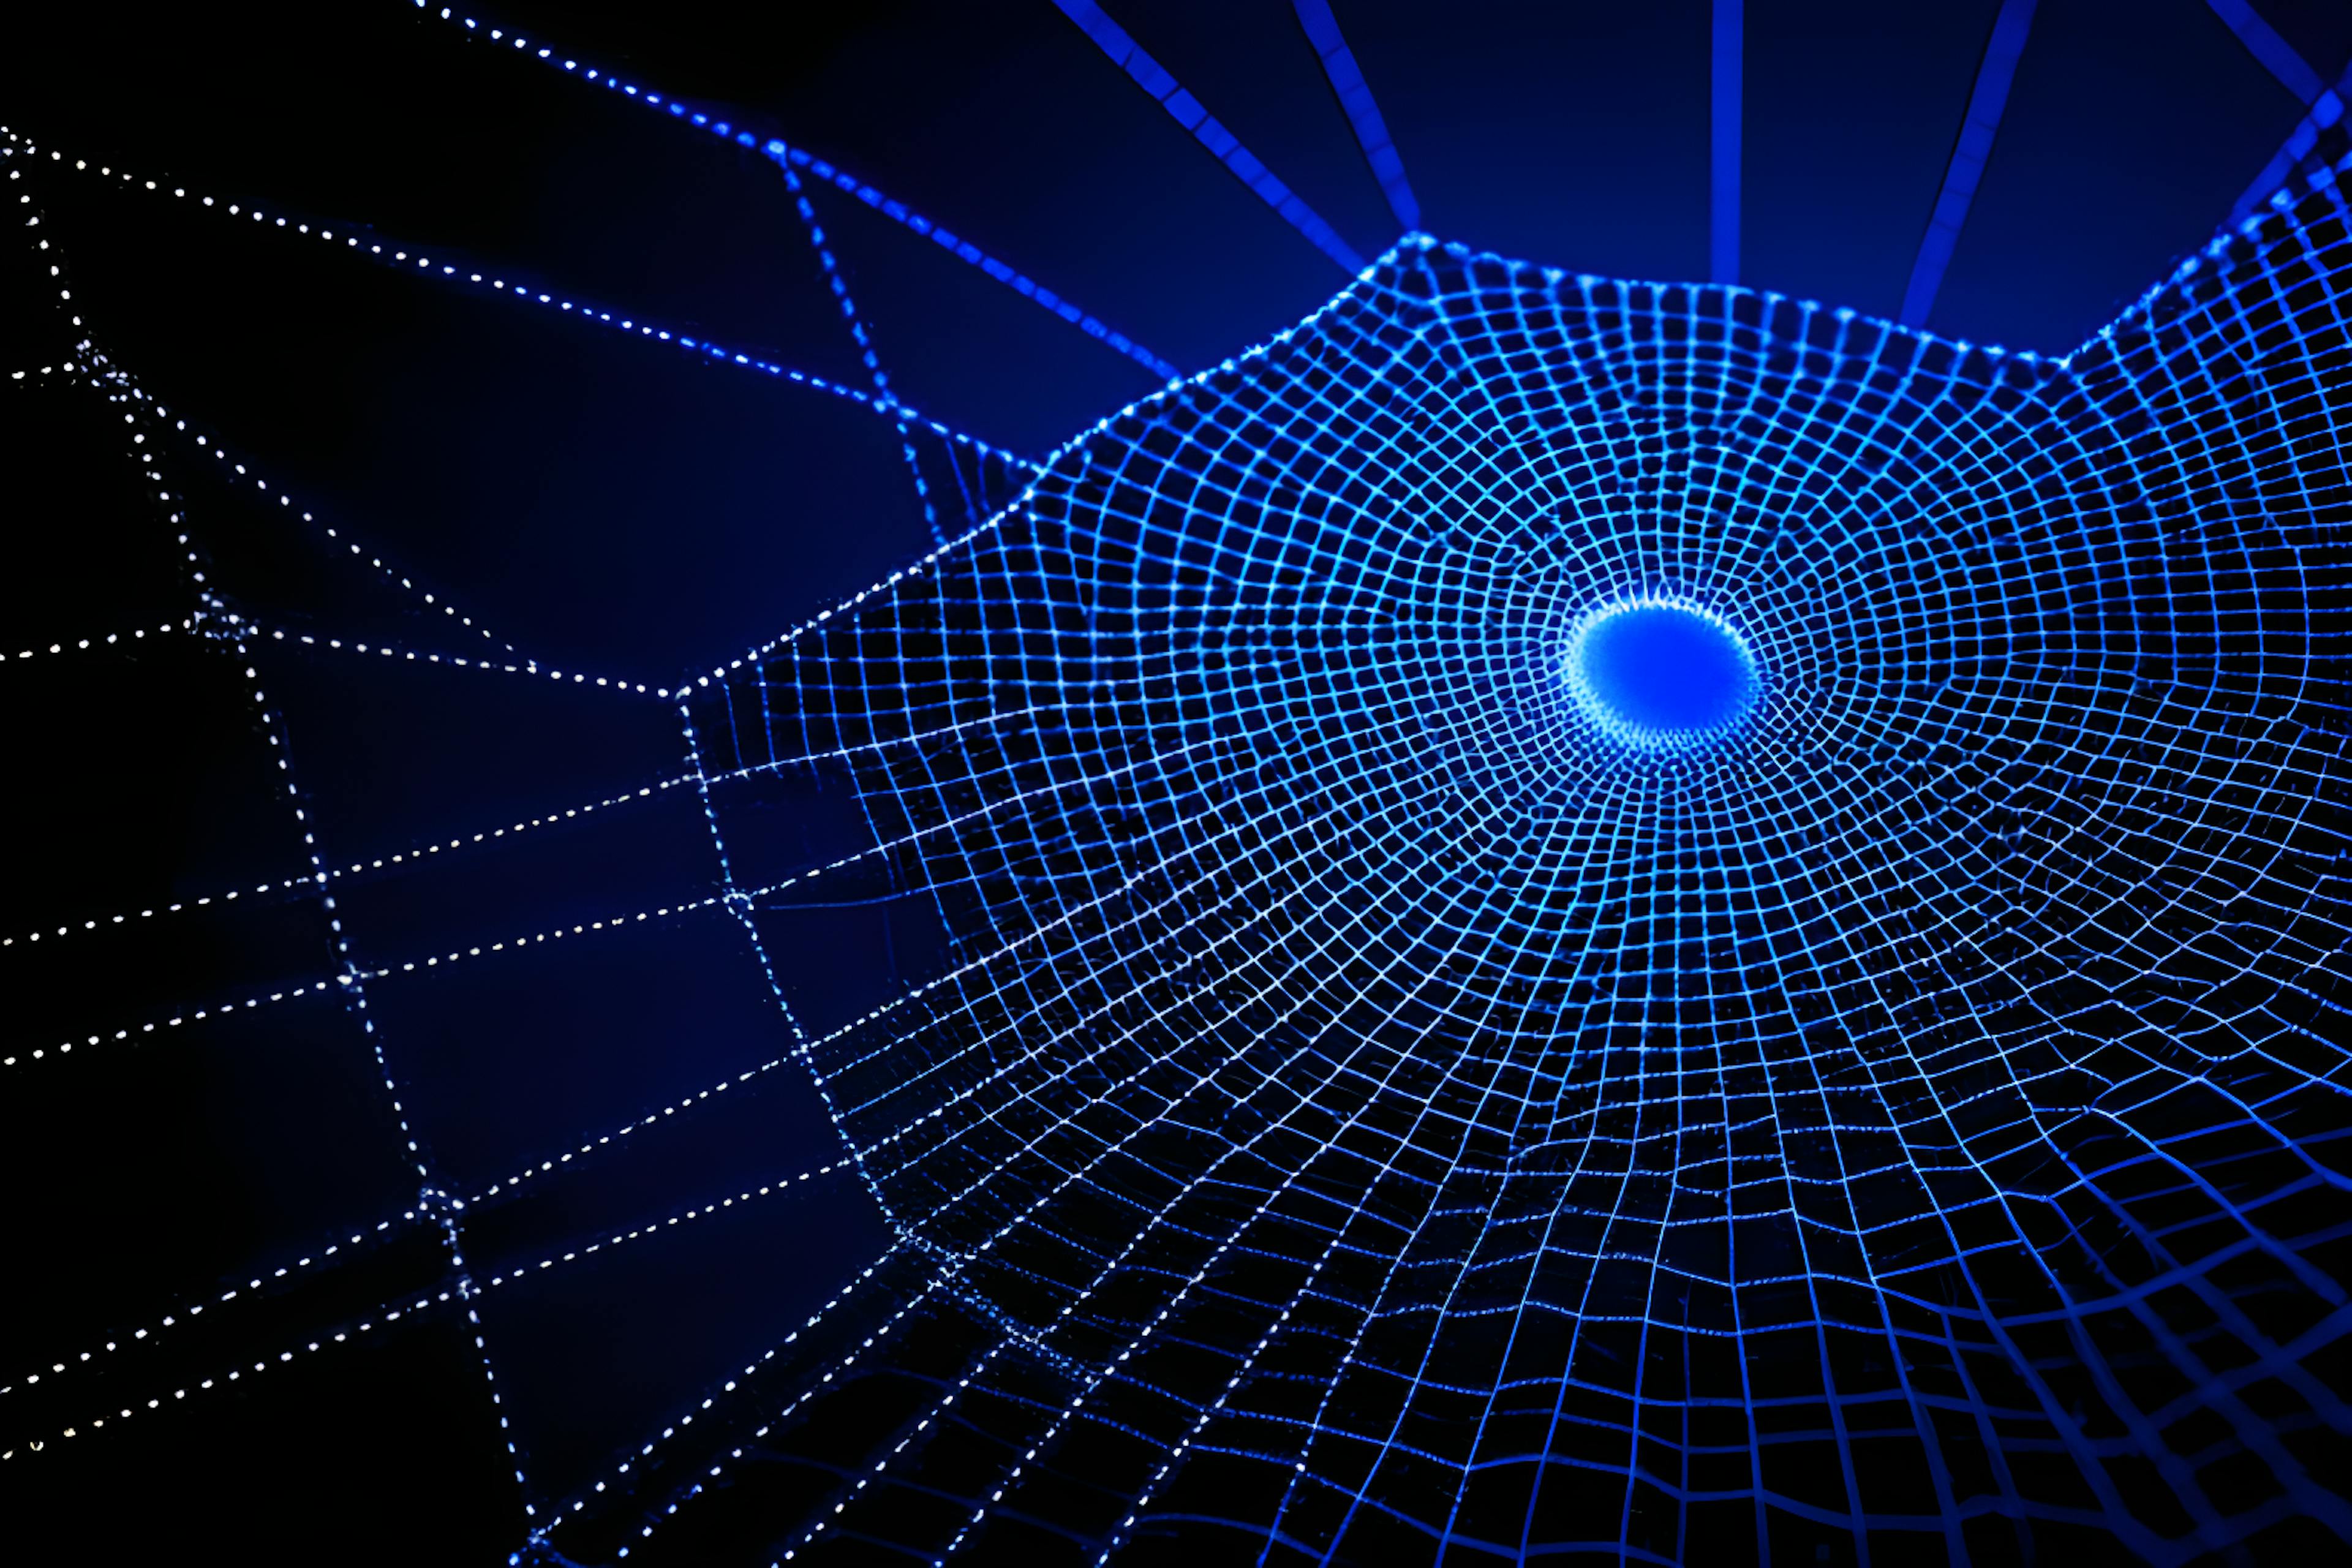 featured image - Metaphysics and Mathematics: The Intricate Web Connecting the Two